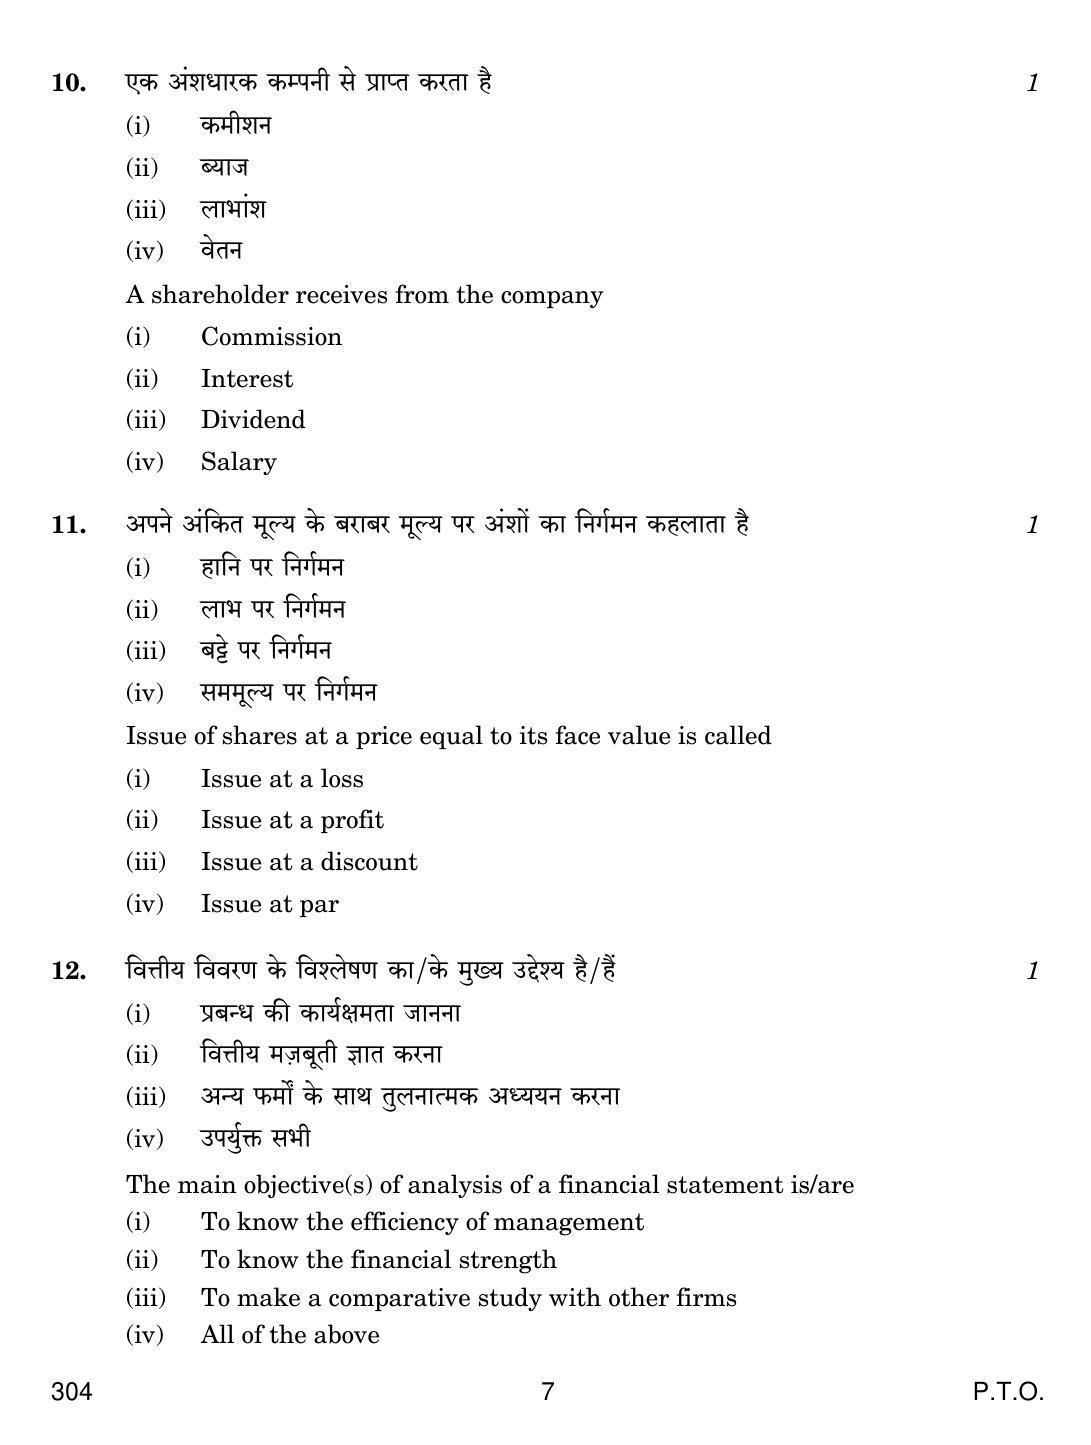 CBSE Class 12 304 FINANCIAL ACCOUNTING 2018 Question Paper - Page 7